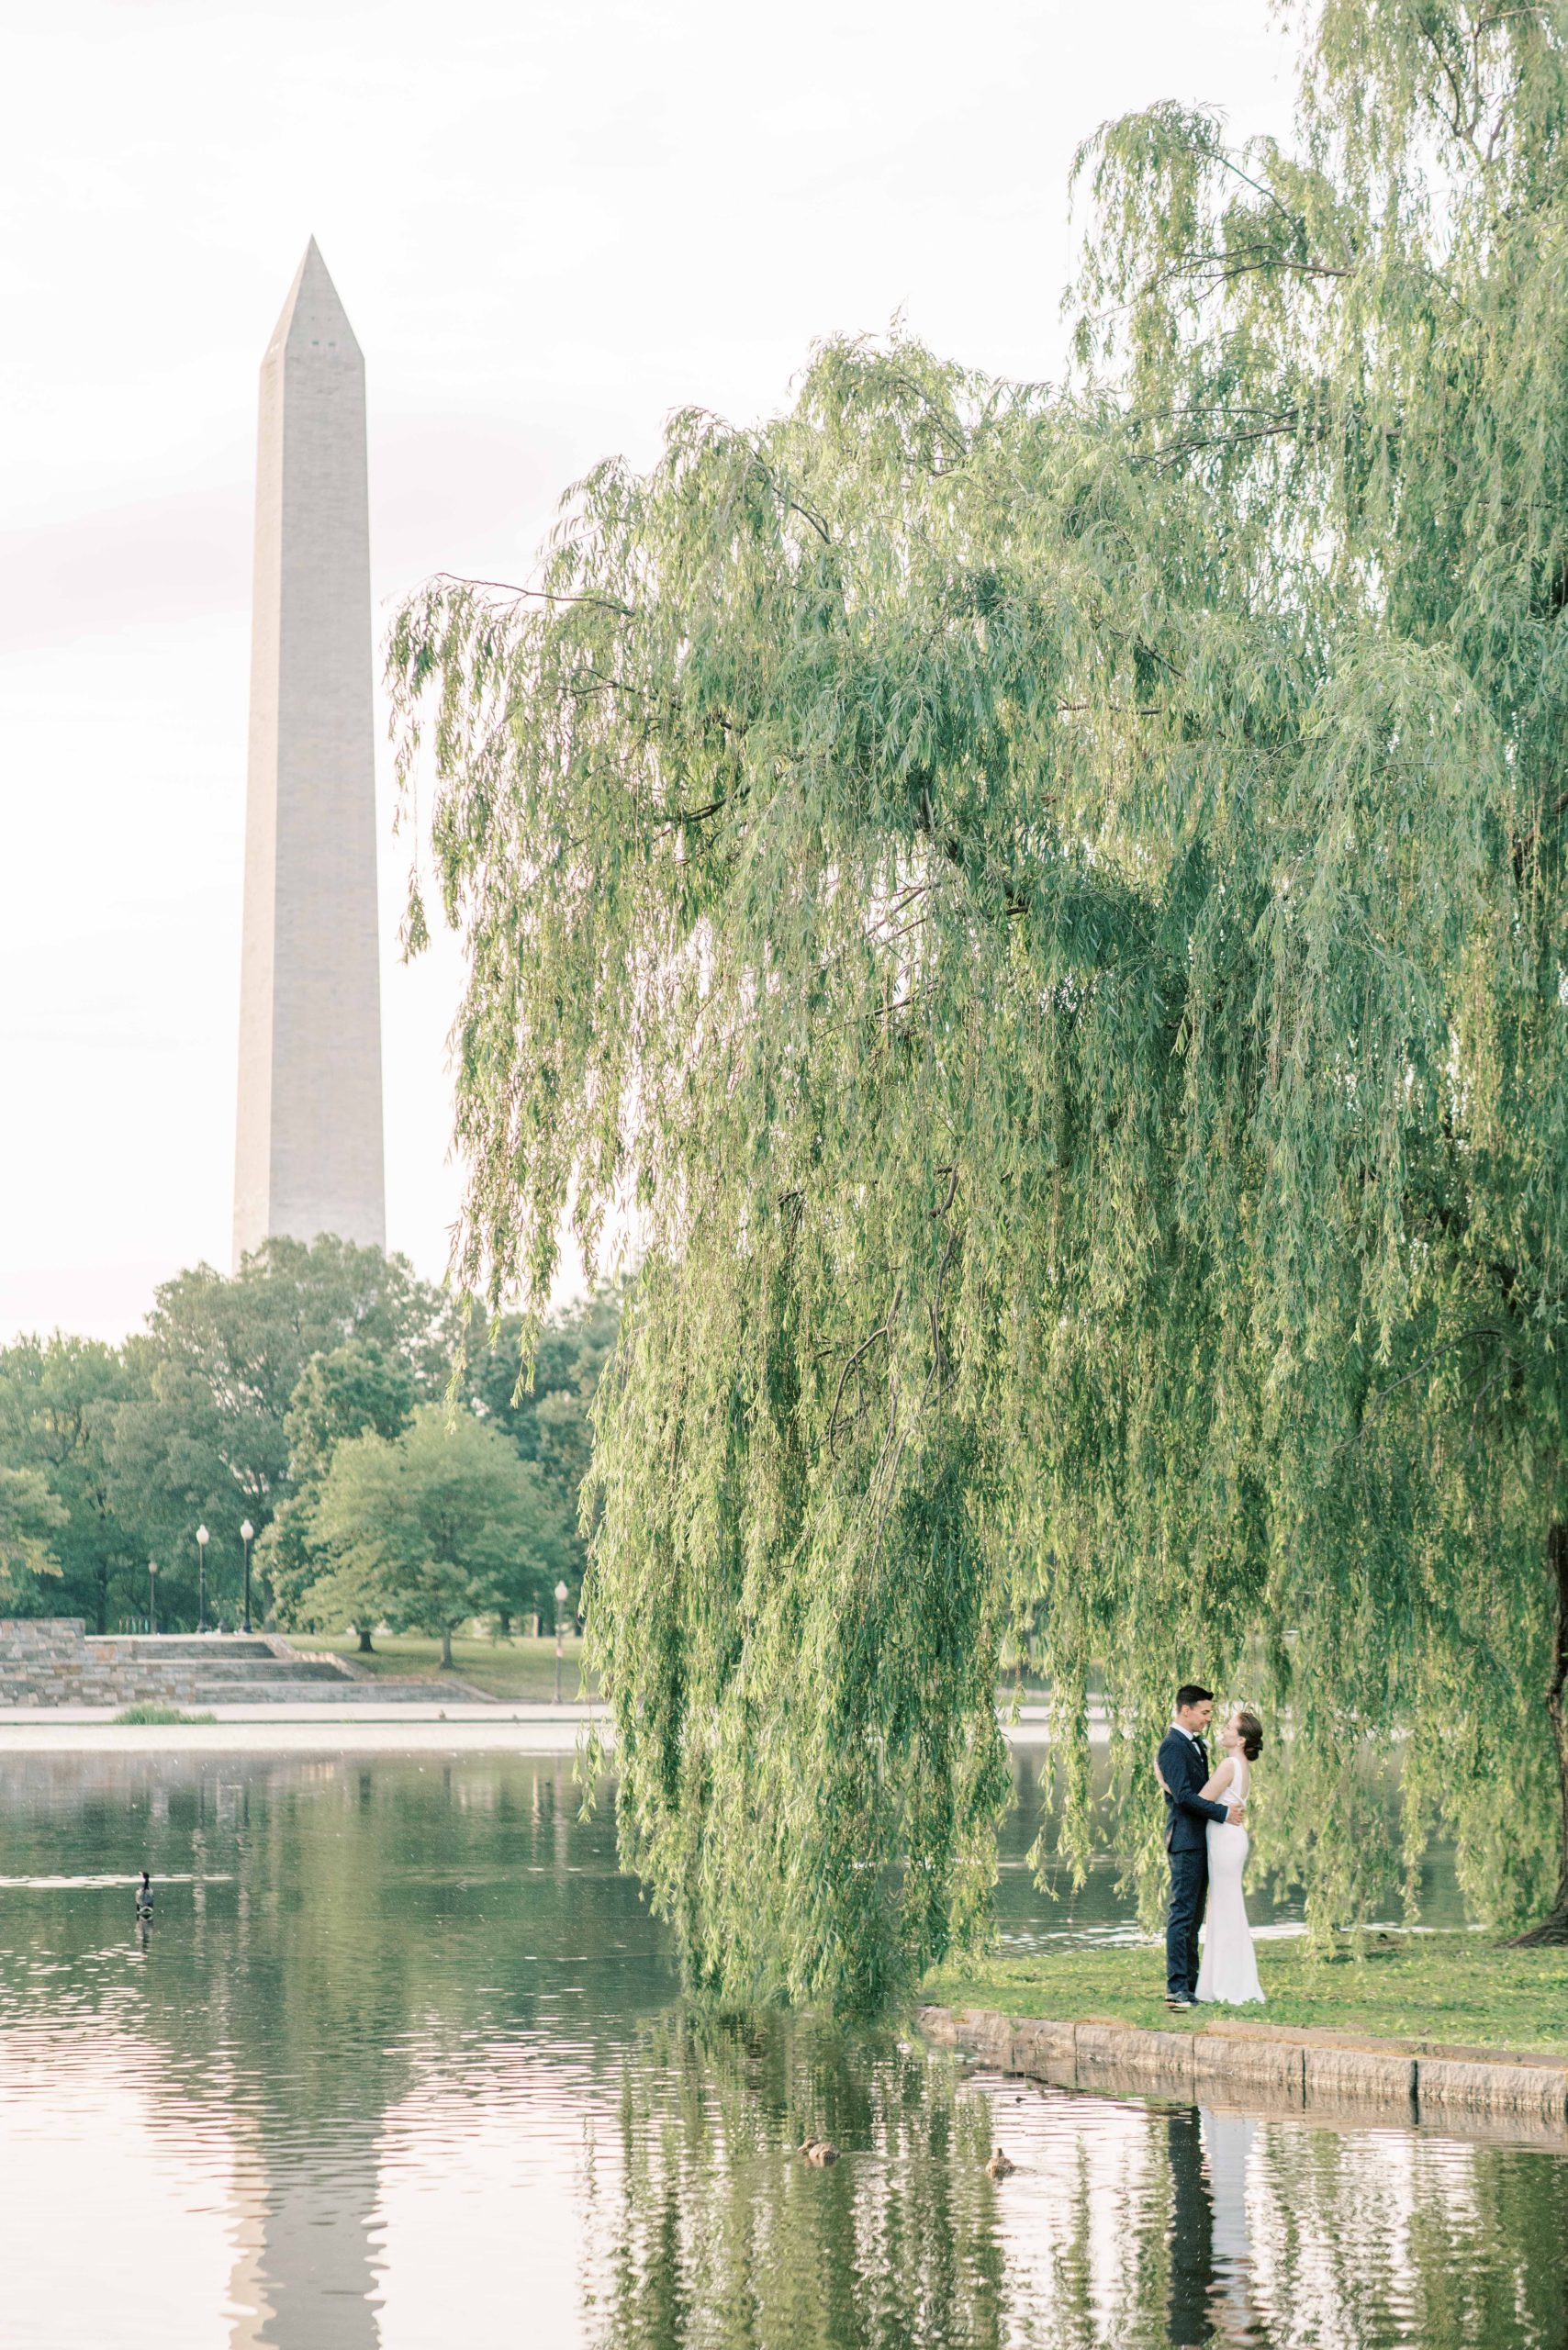 A private elopement held at the DC War Memorial in Washington, DC with photographs by Alicia Lacey Photography.